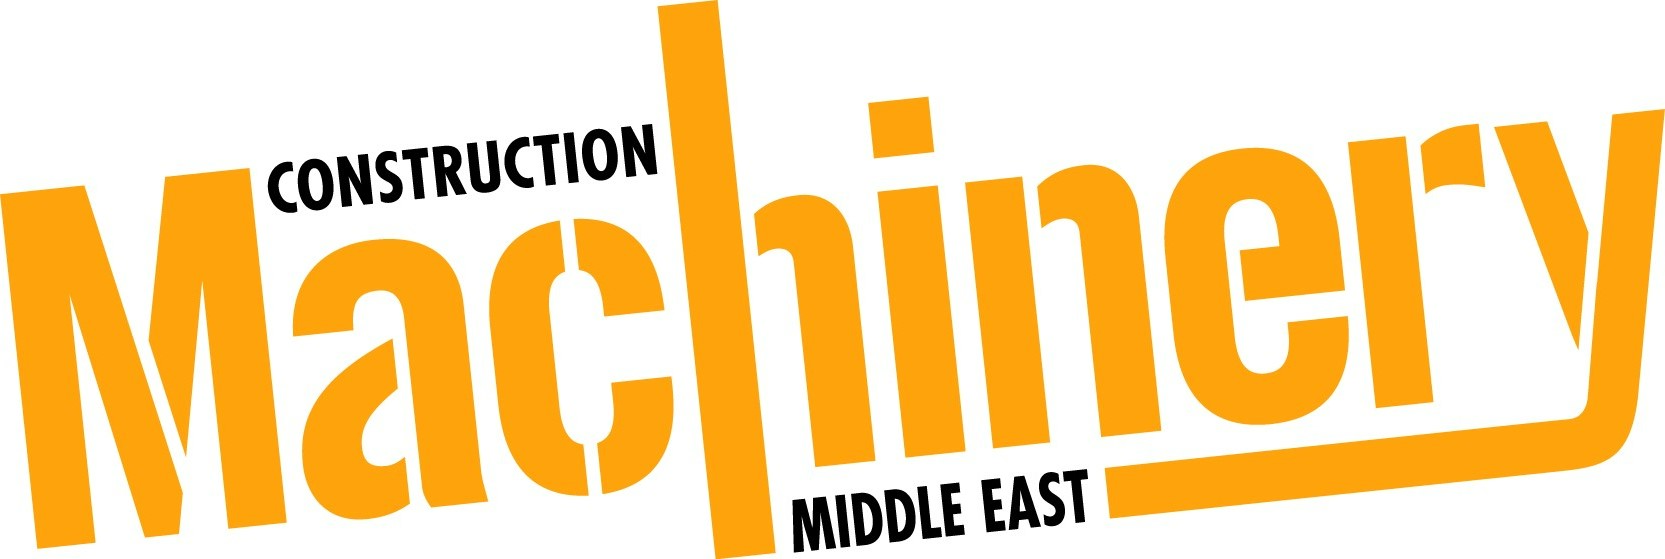 Construction Machinery Middle East